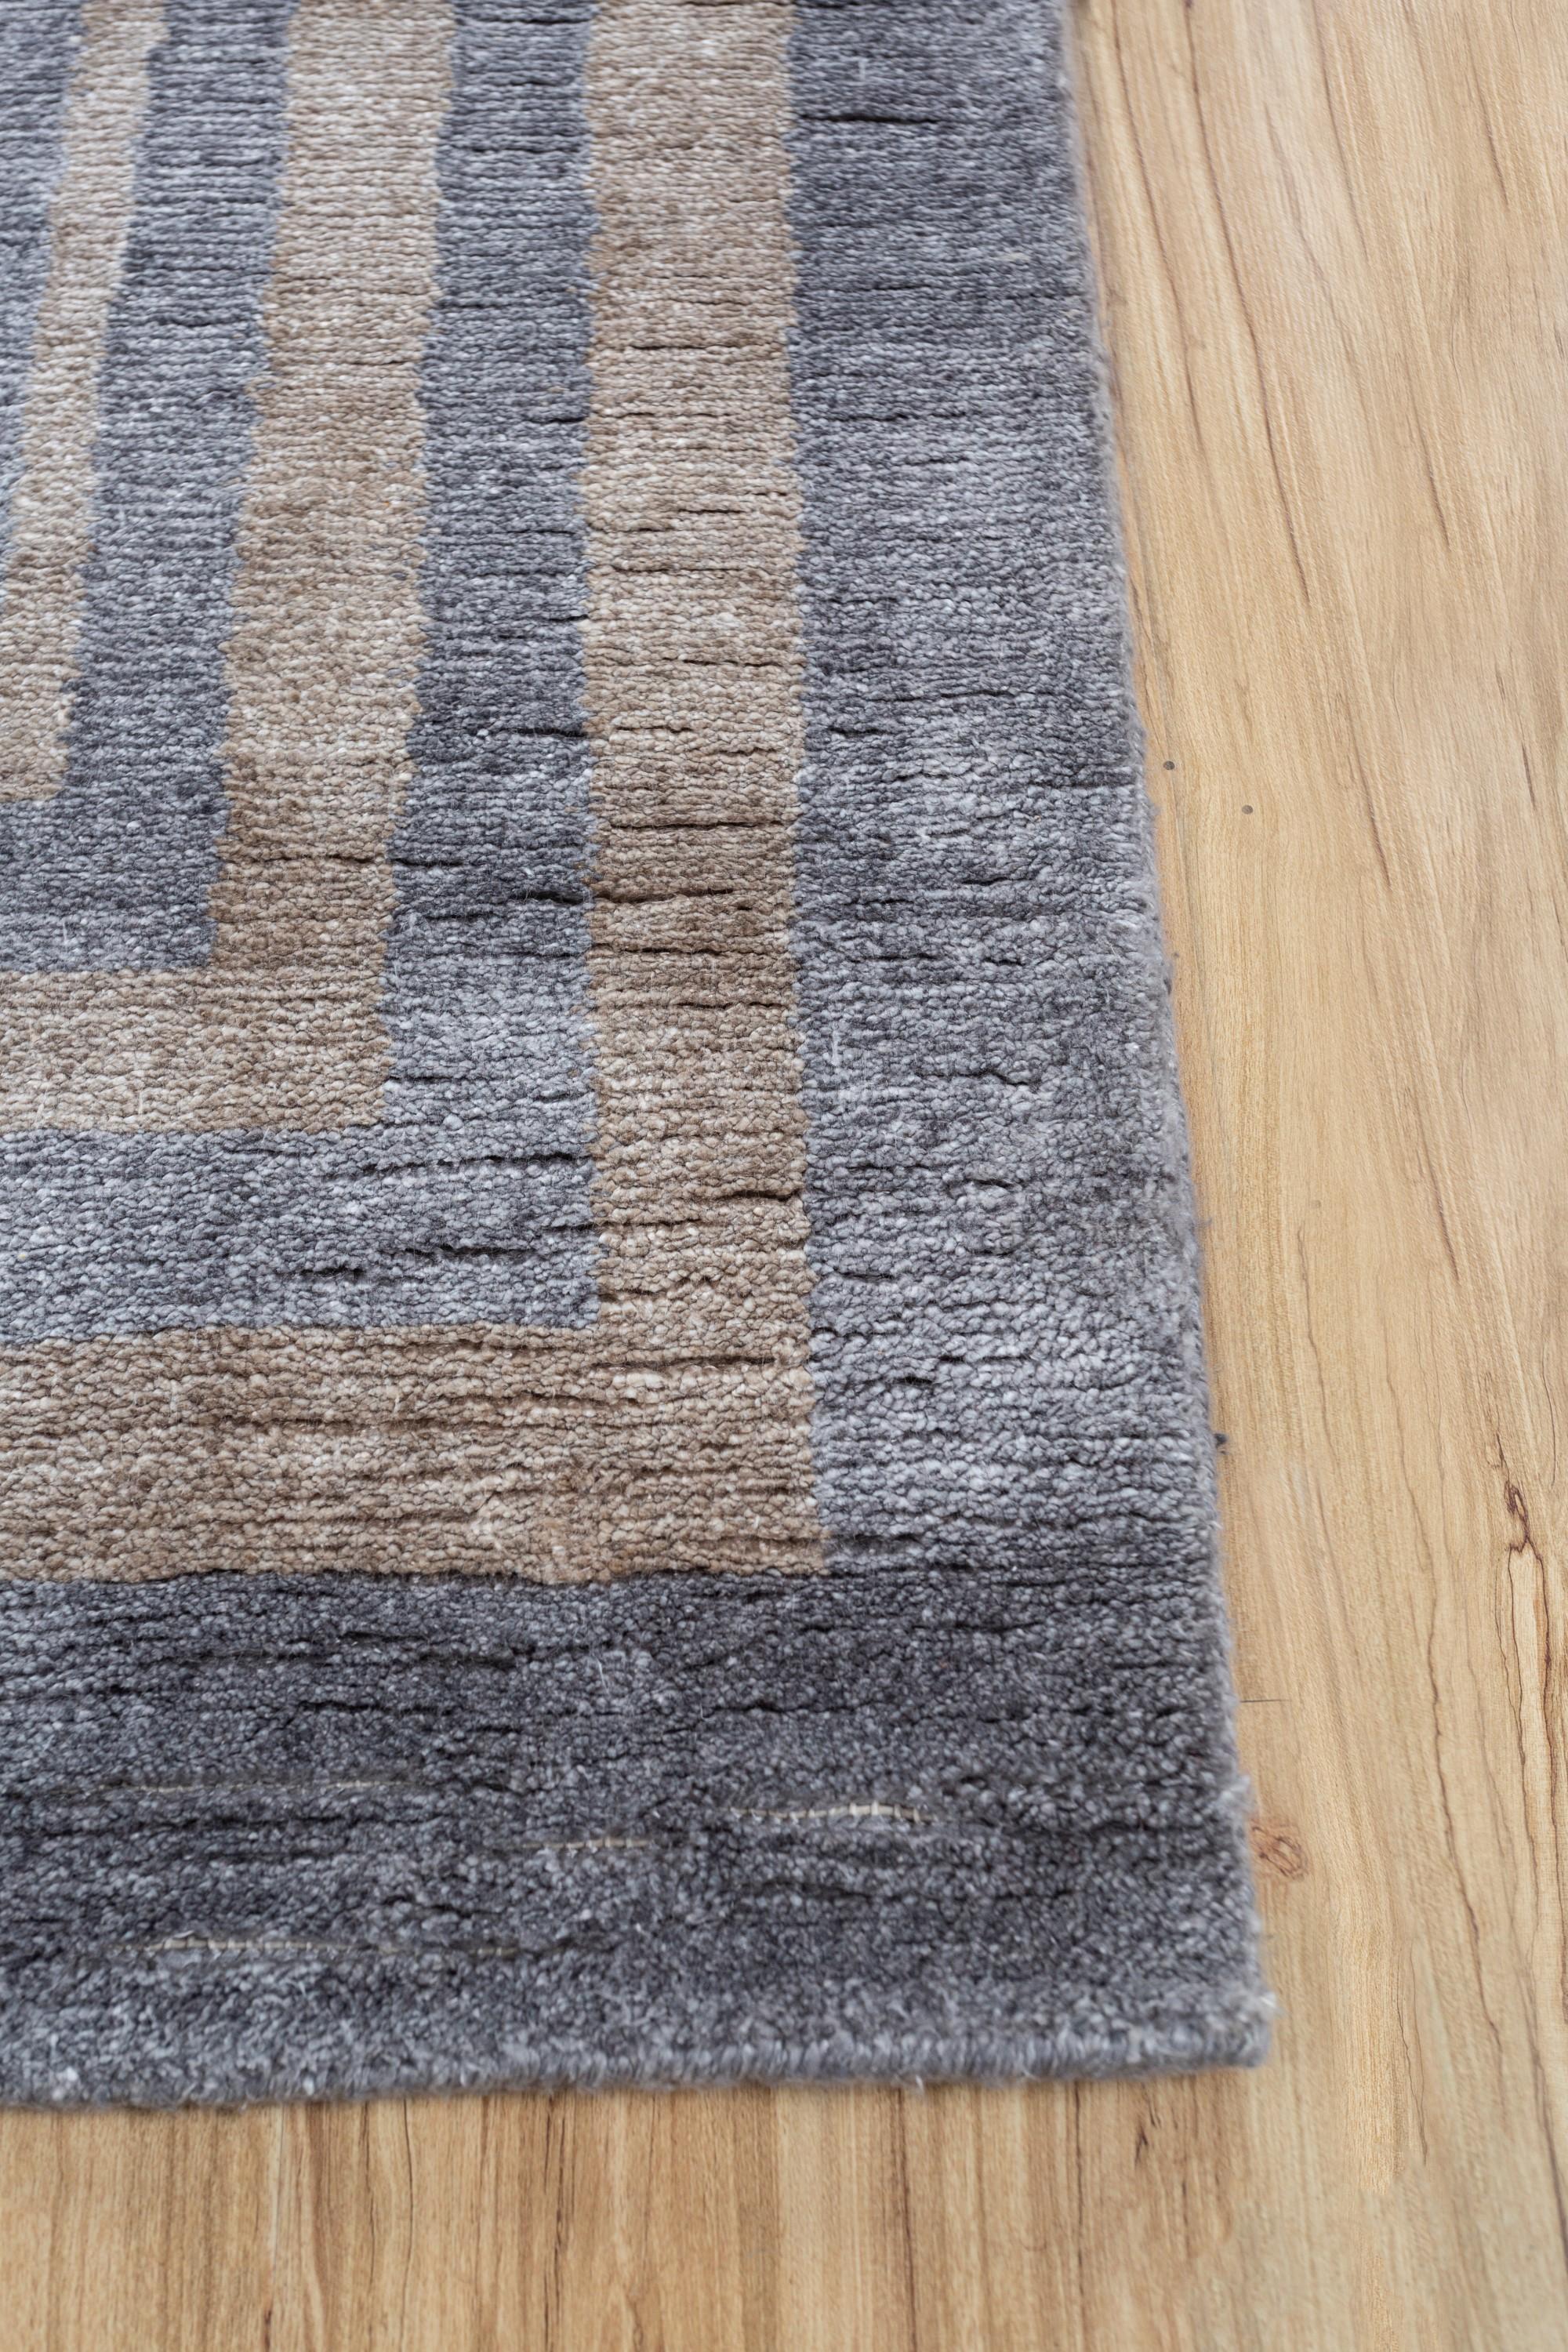 Can a rug be the key to transforming your space into a haven of tranquility? Introducing this hand-knotted marvel  designed to elevate any room. With a soothing tone-on-tone palette, this rug effortlessly uplifts the mood, adding warmth and comfort